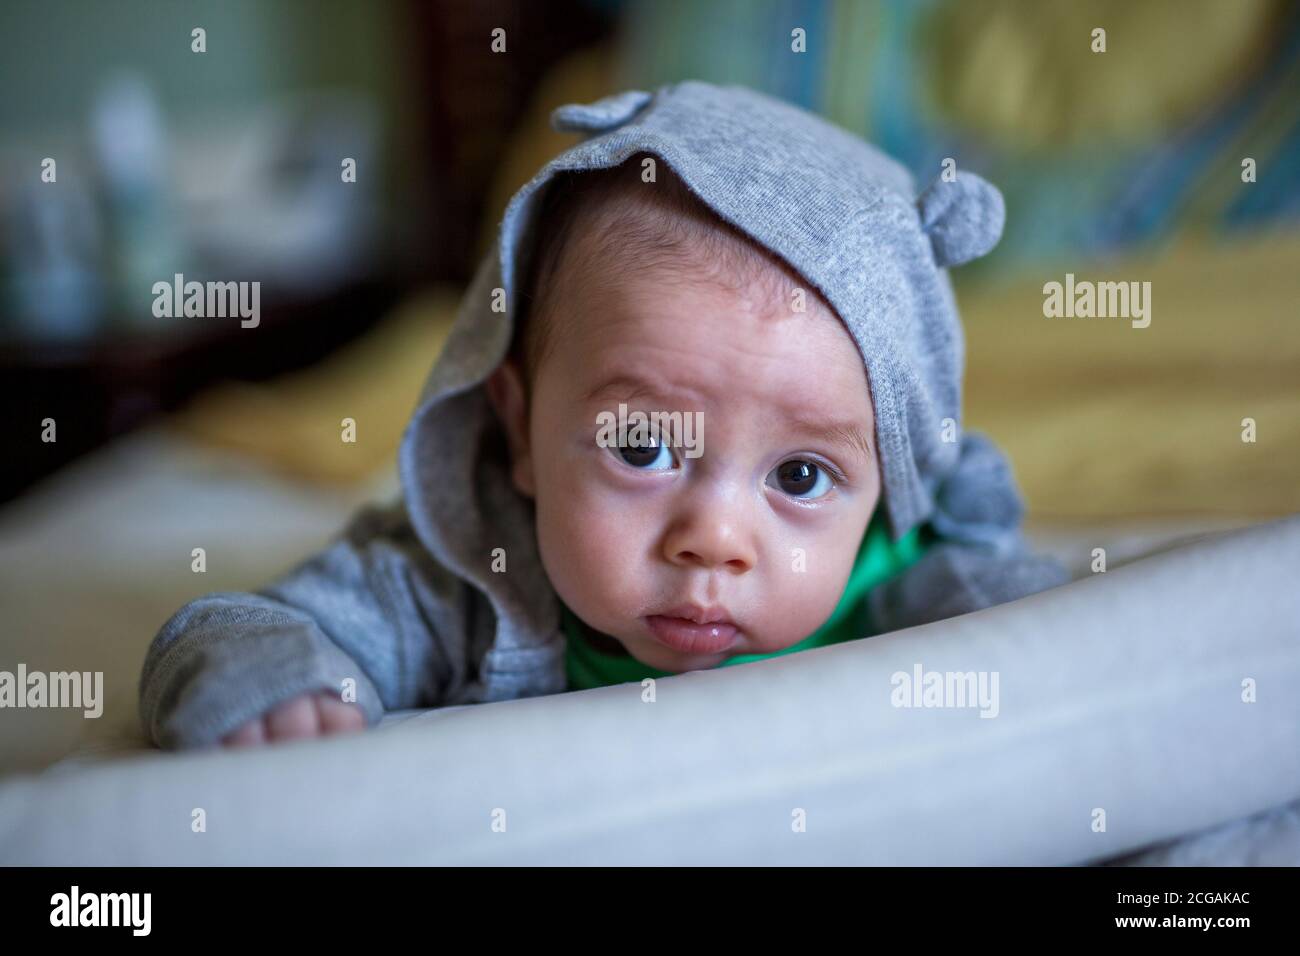 Infant in grey sweatshirt with ears laying on pillow looking at camera with large brown eyes Stock Photo